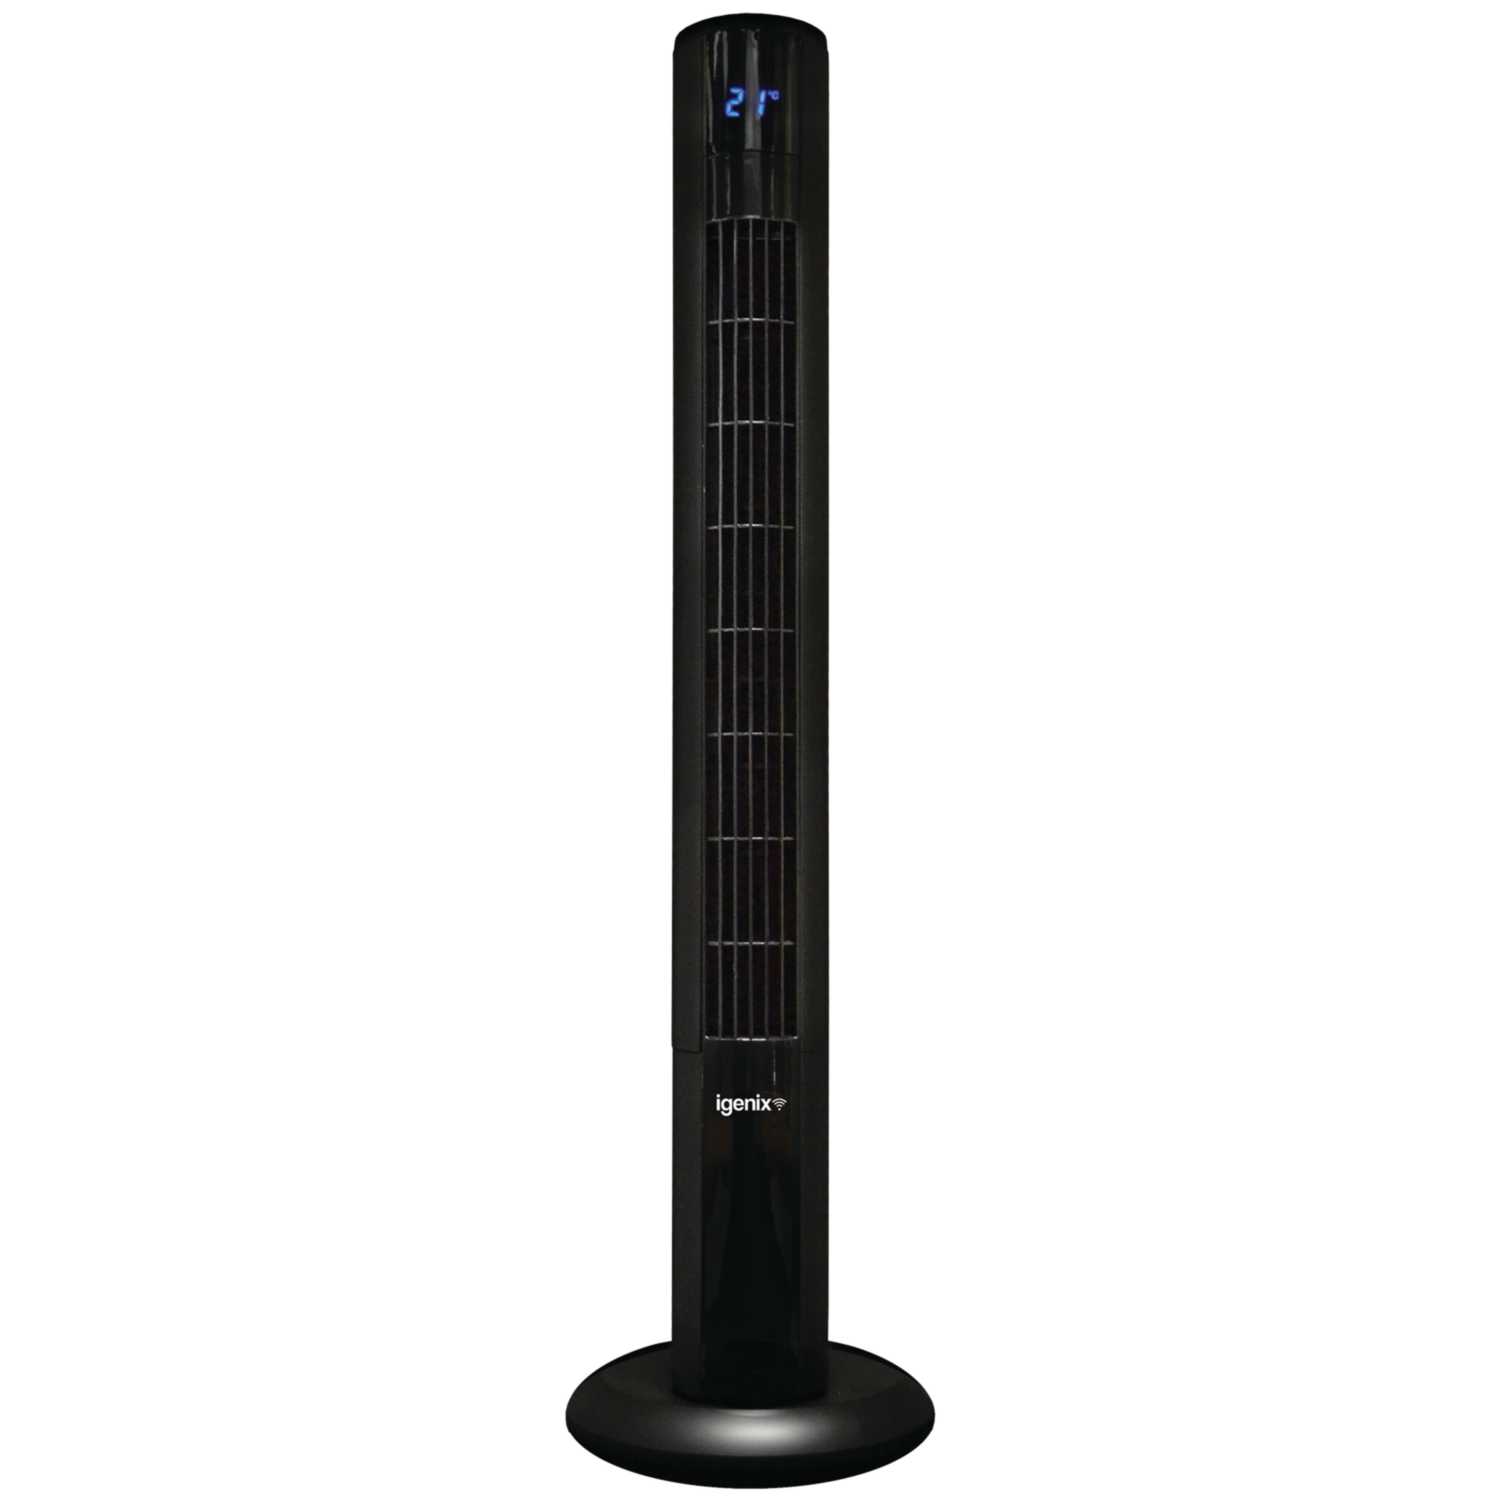 Smart Digital Tower Fan with Voice Control - Black